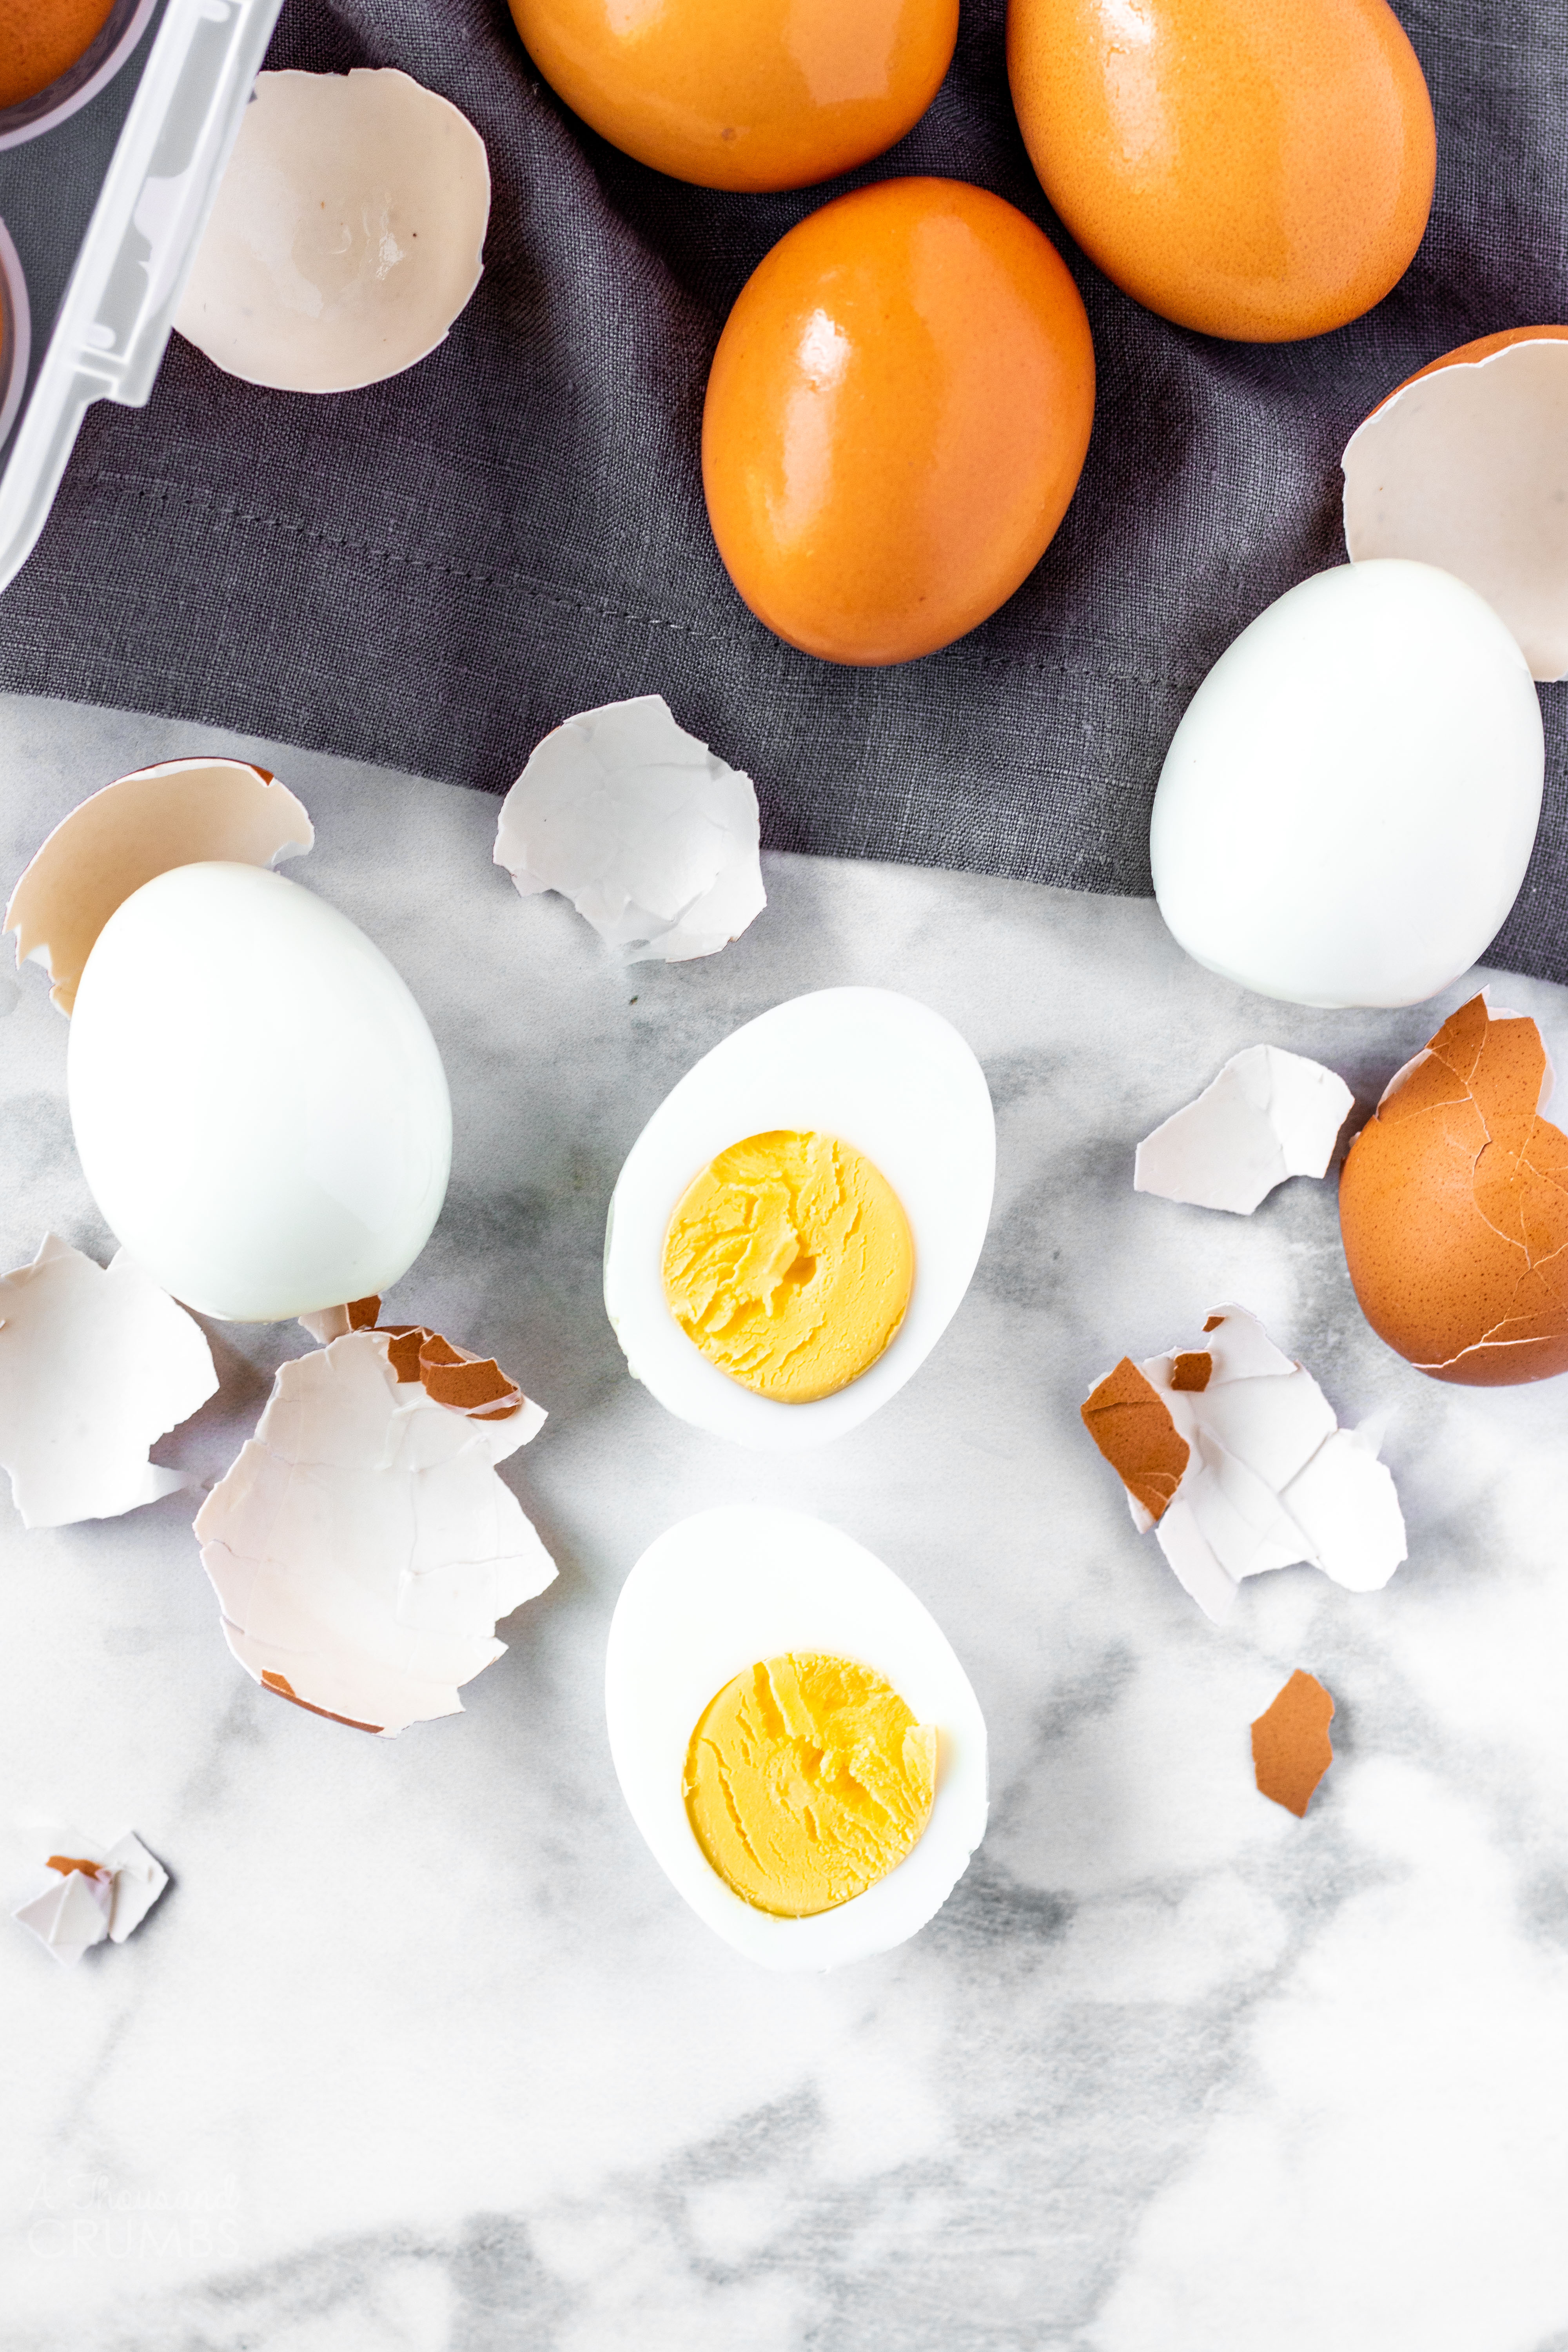 Easy to peel hard boiled eggs 2 ways – with and without an Instant Pot. #athousandcrumbs #hardboiledeggs #instantpot #easypeel #stovetop